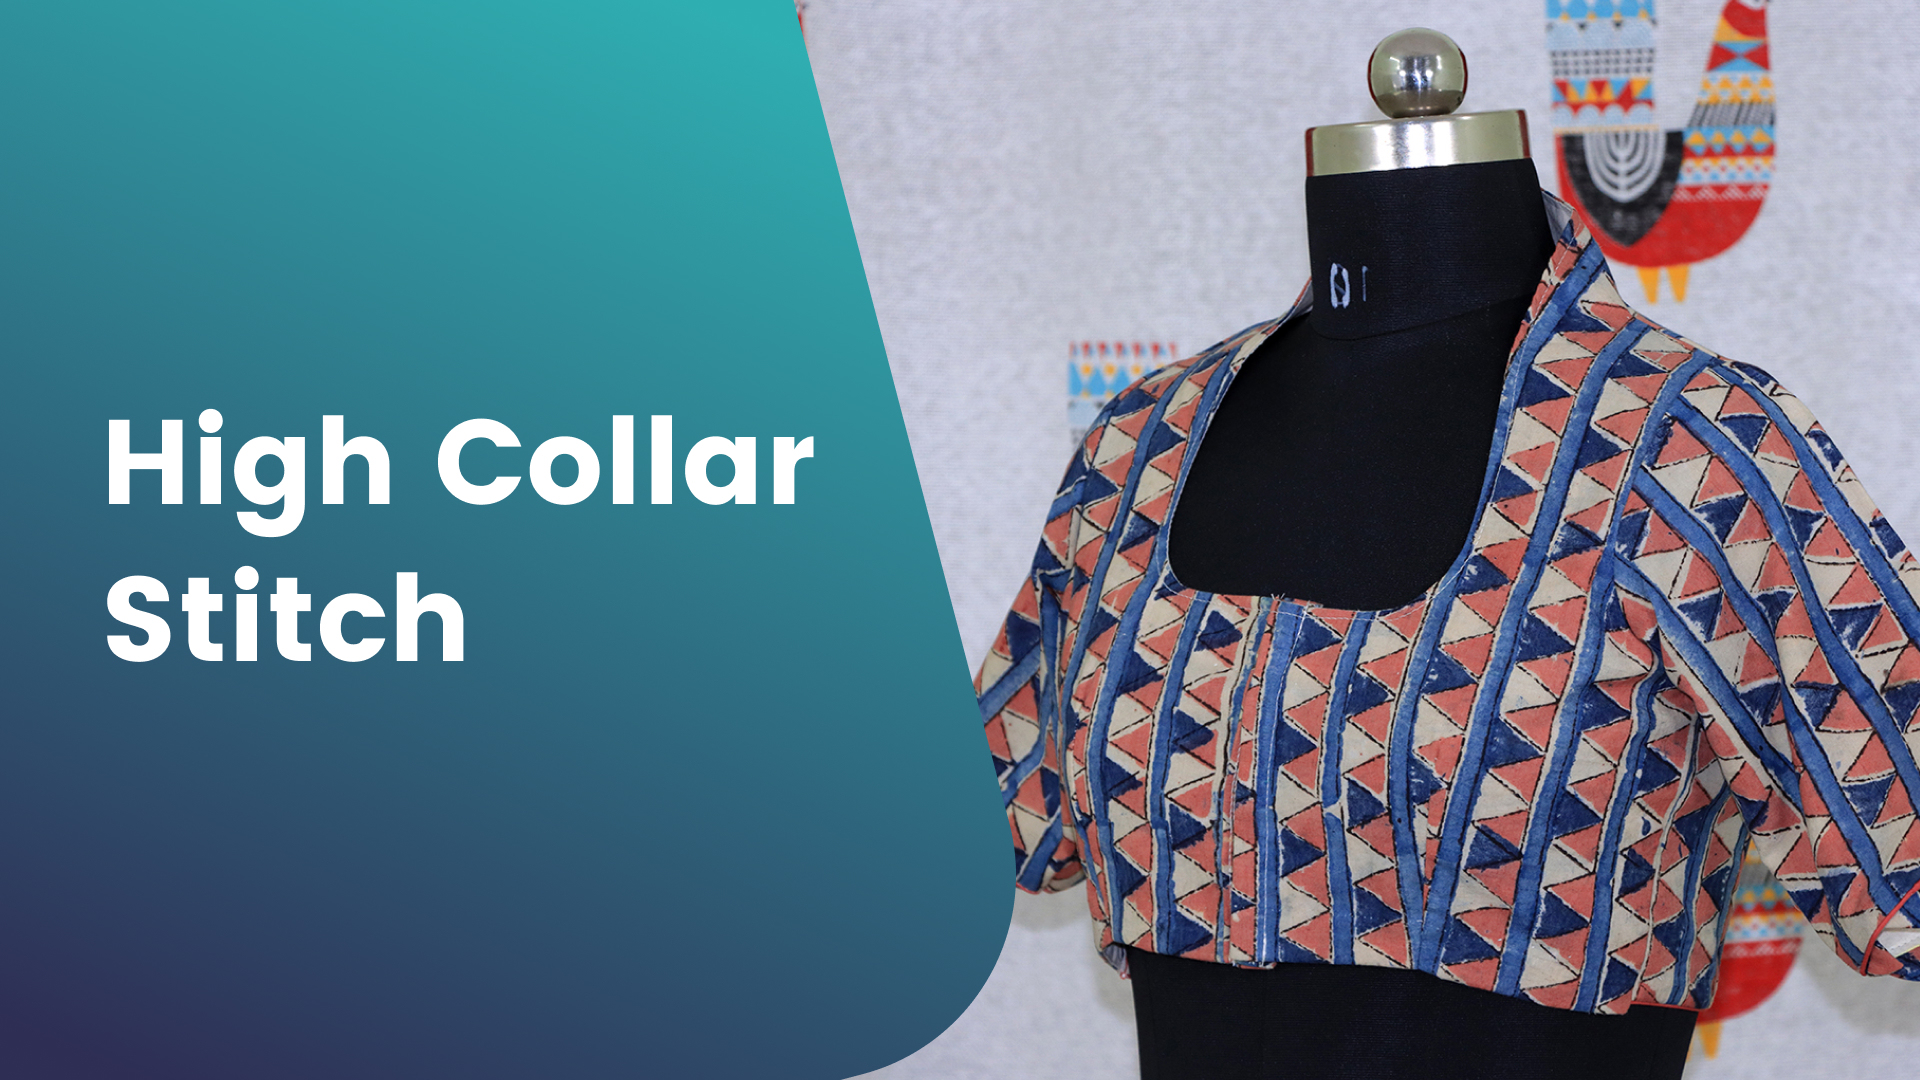 Course Trailer: How to Stitch a High Collar Blouse?. Watch to know more.